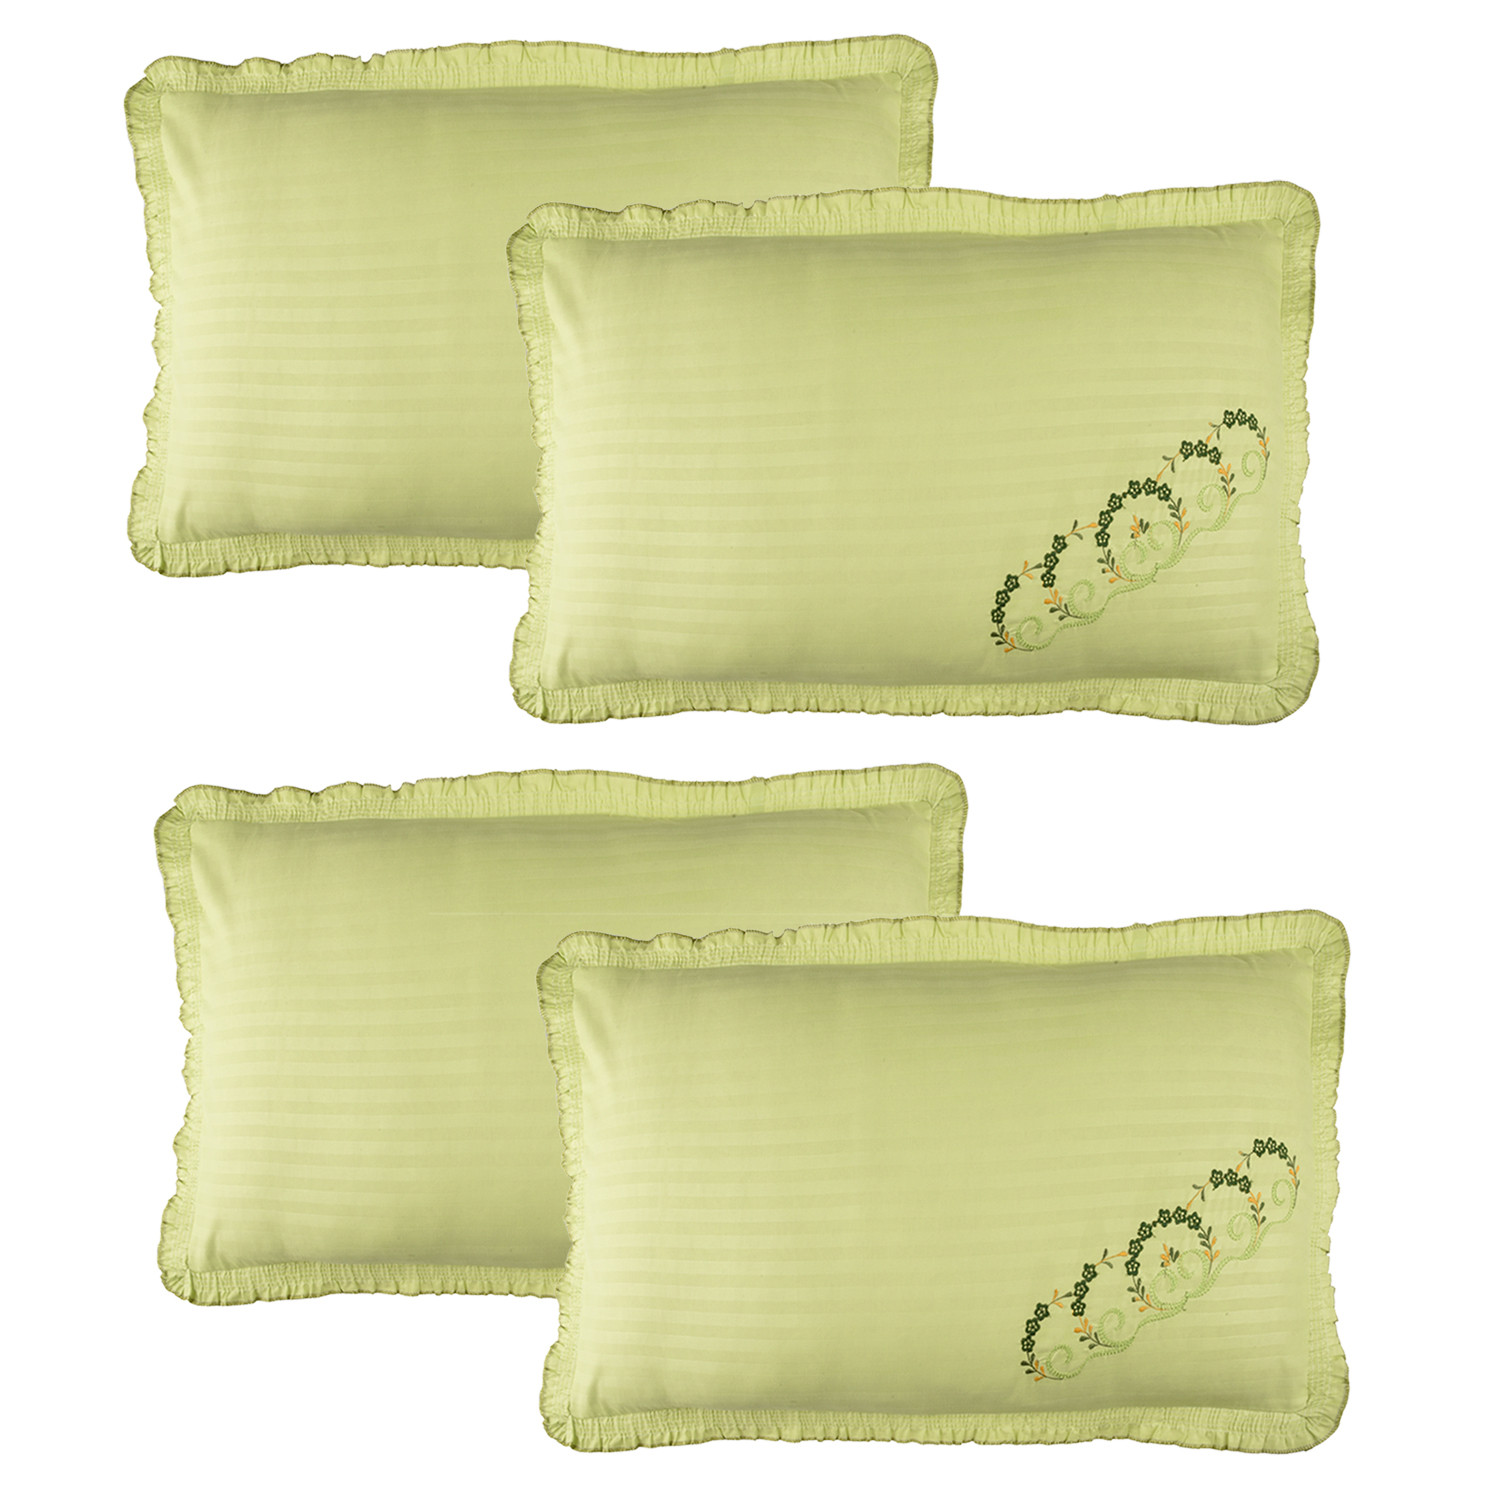 Kuber Industries Pillow Cover | Cotton Pillow Cover Set | Cushion Pillow Cover Set | Pillow Cover Set for Bedroom | Lining Embroidery Pillow Cover Set |Parrot Green